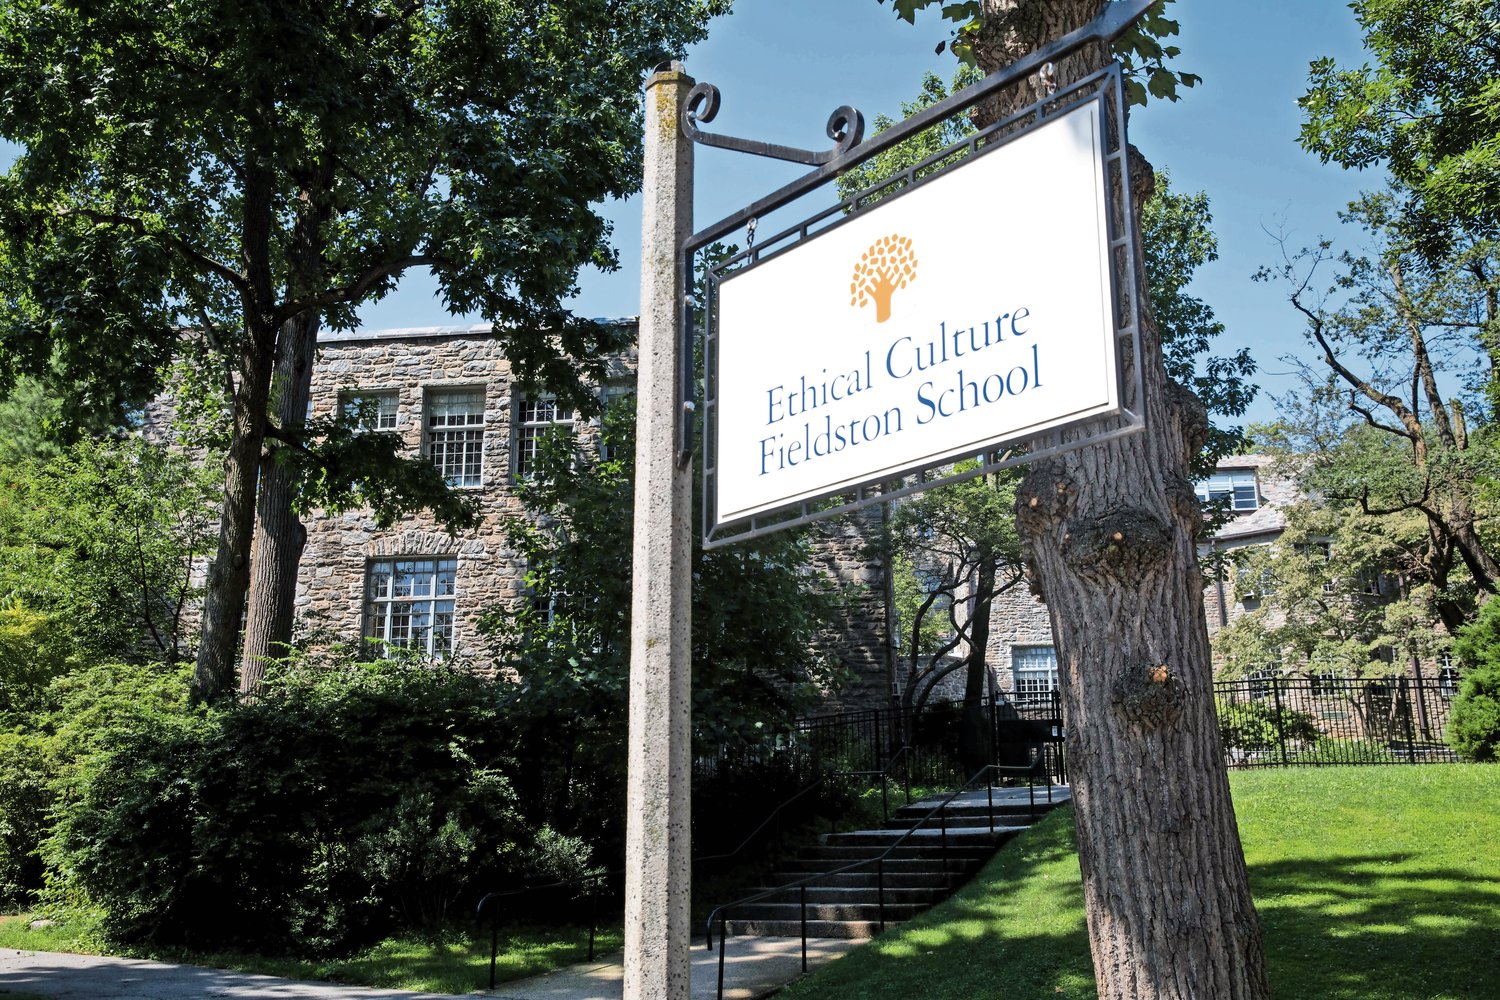 The Ethical Culture Fieldston School in Riverdale.